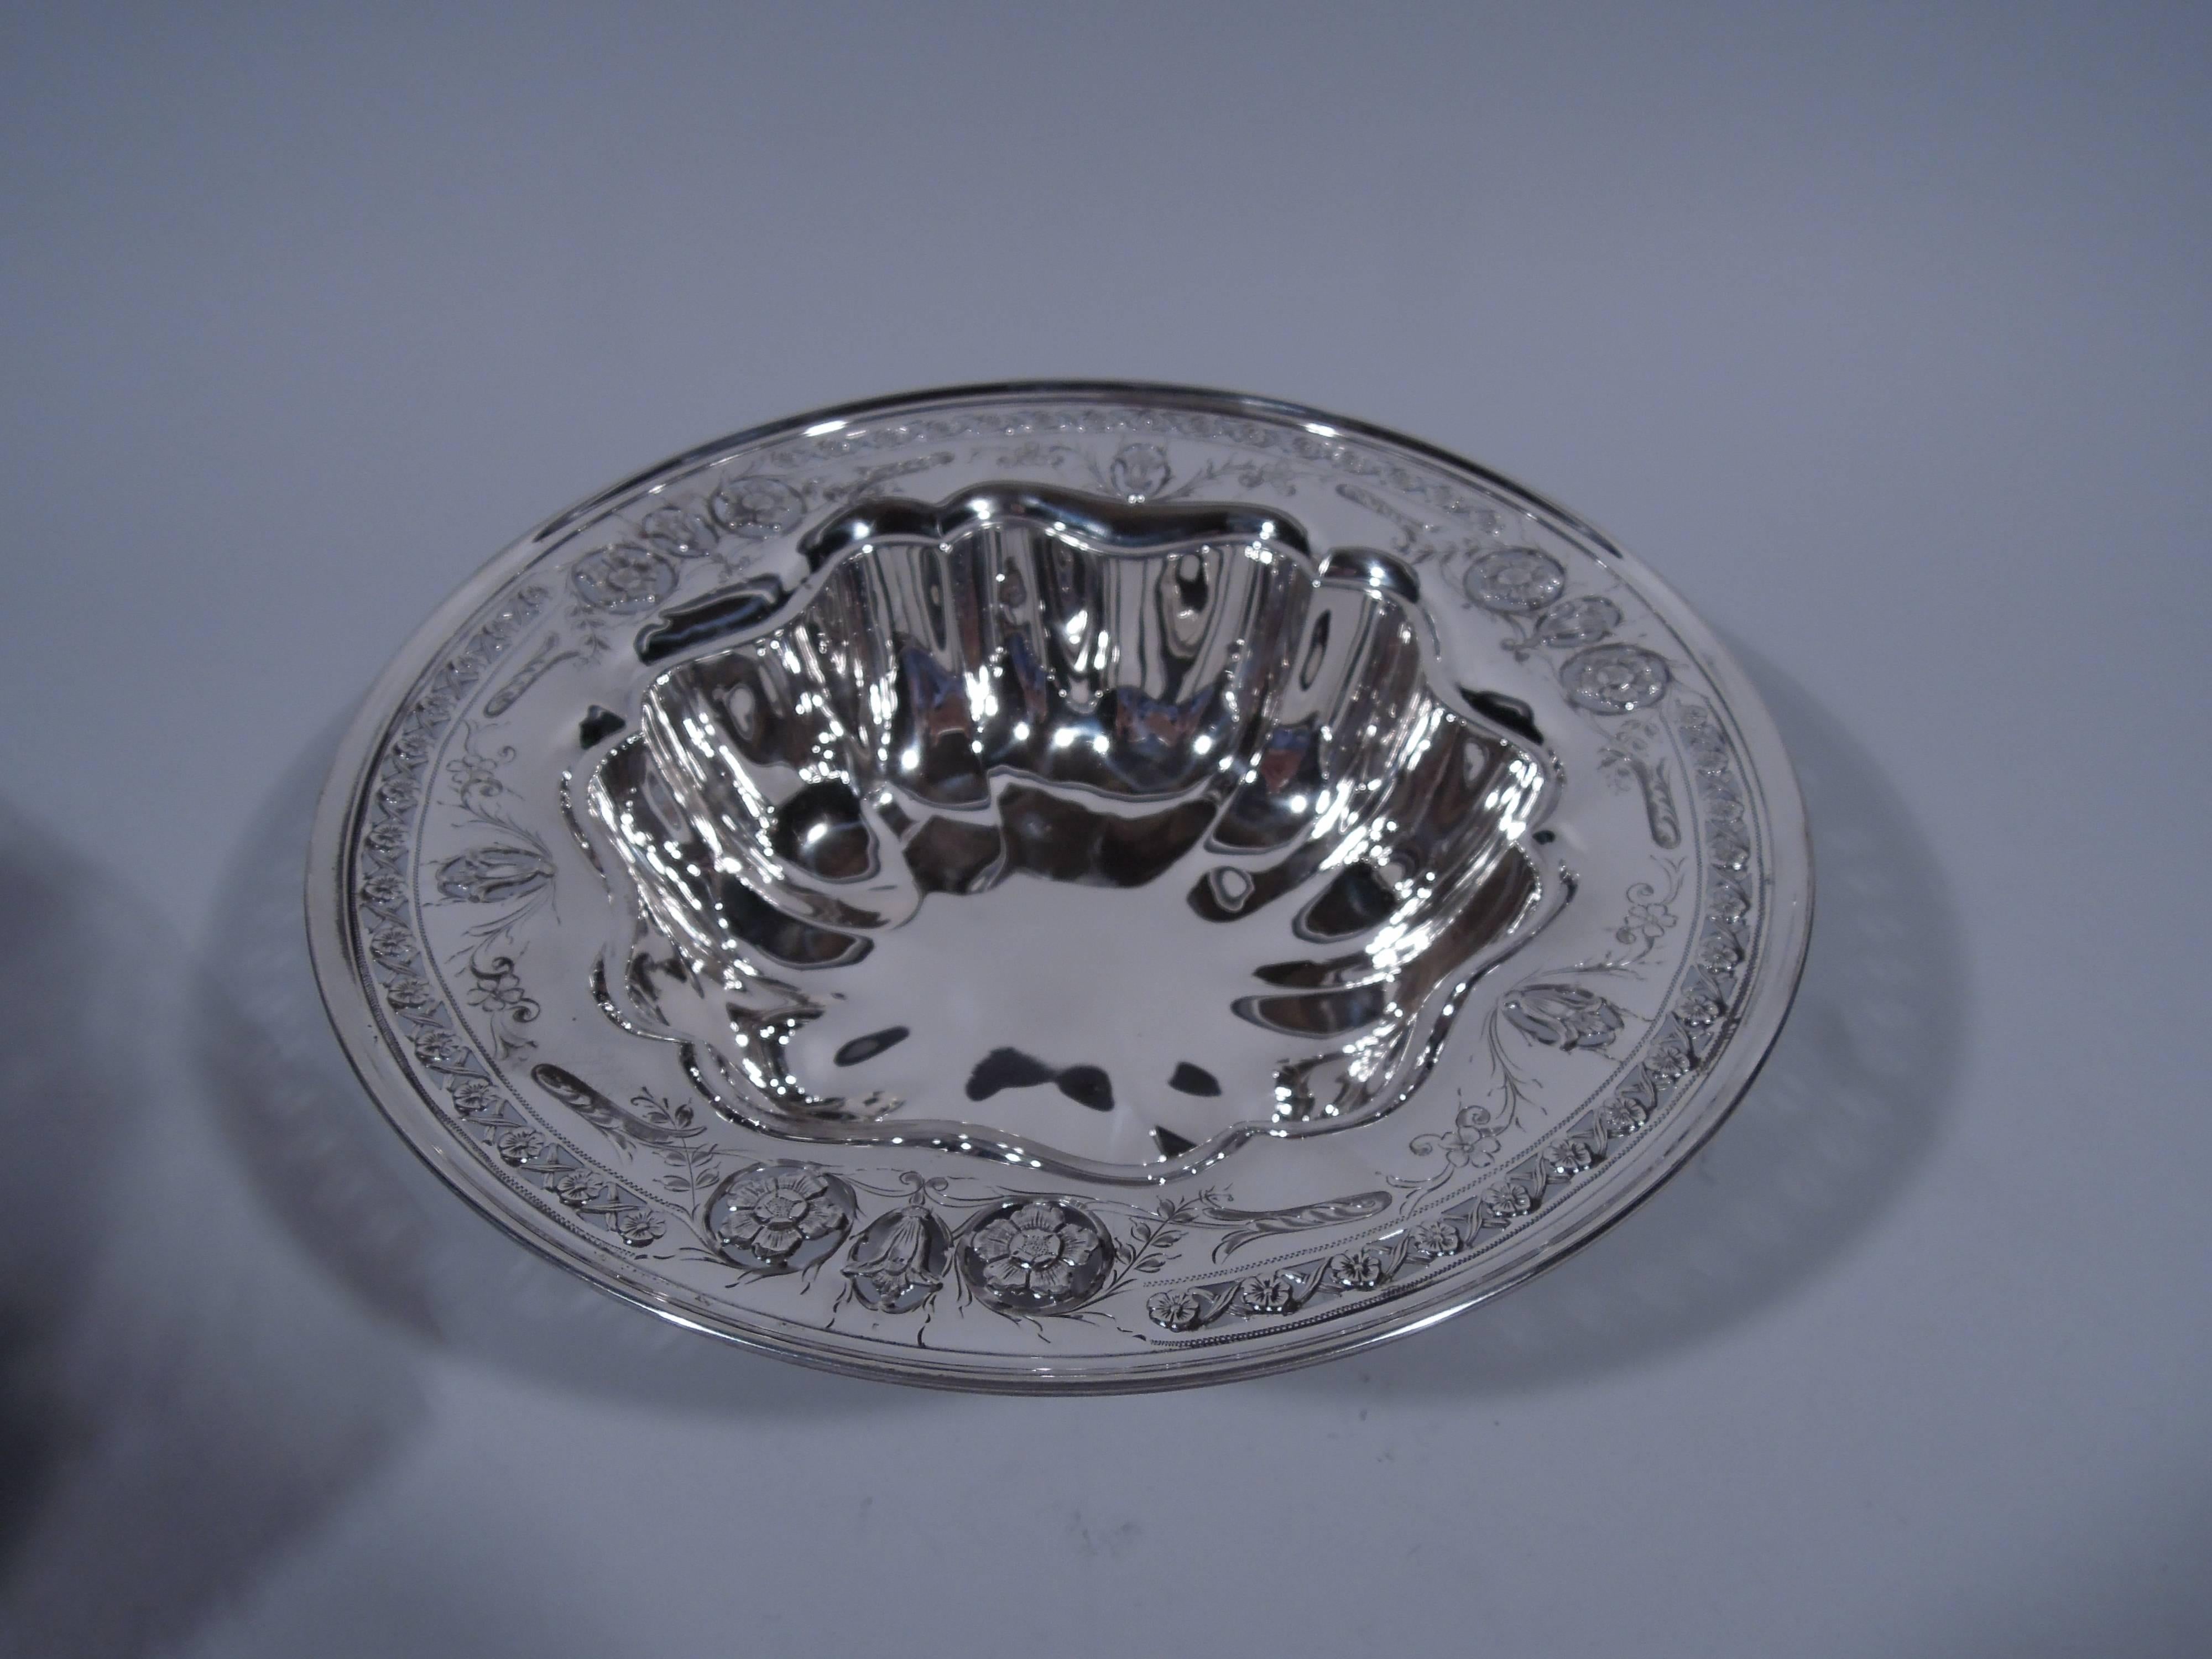 American sterling silver bowl, circa 1915. Fluted bowl and wide and pierced rim with flowers set in roundels and border with alternating flowers and X’s. Wholesome Art Nouveau with pretty period ornament. Hallmark includes no. 124. Very good